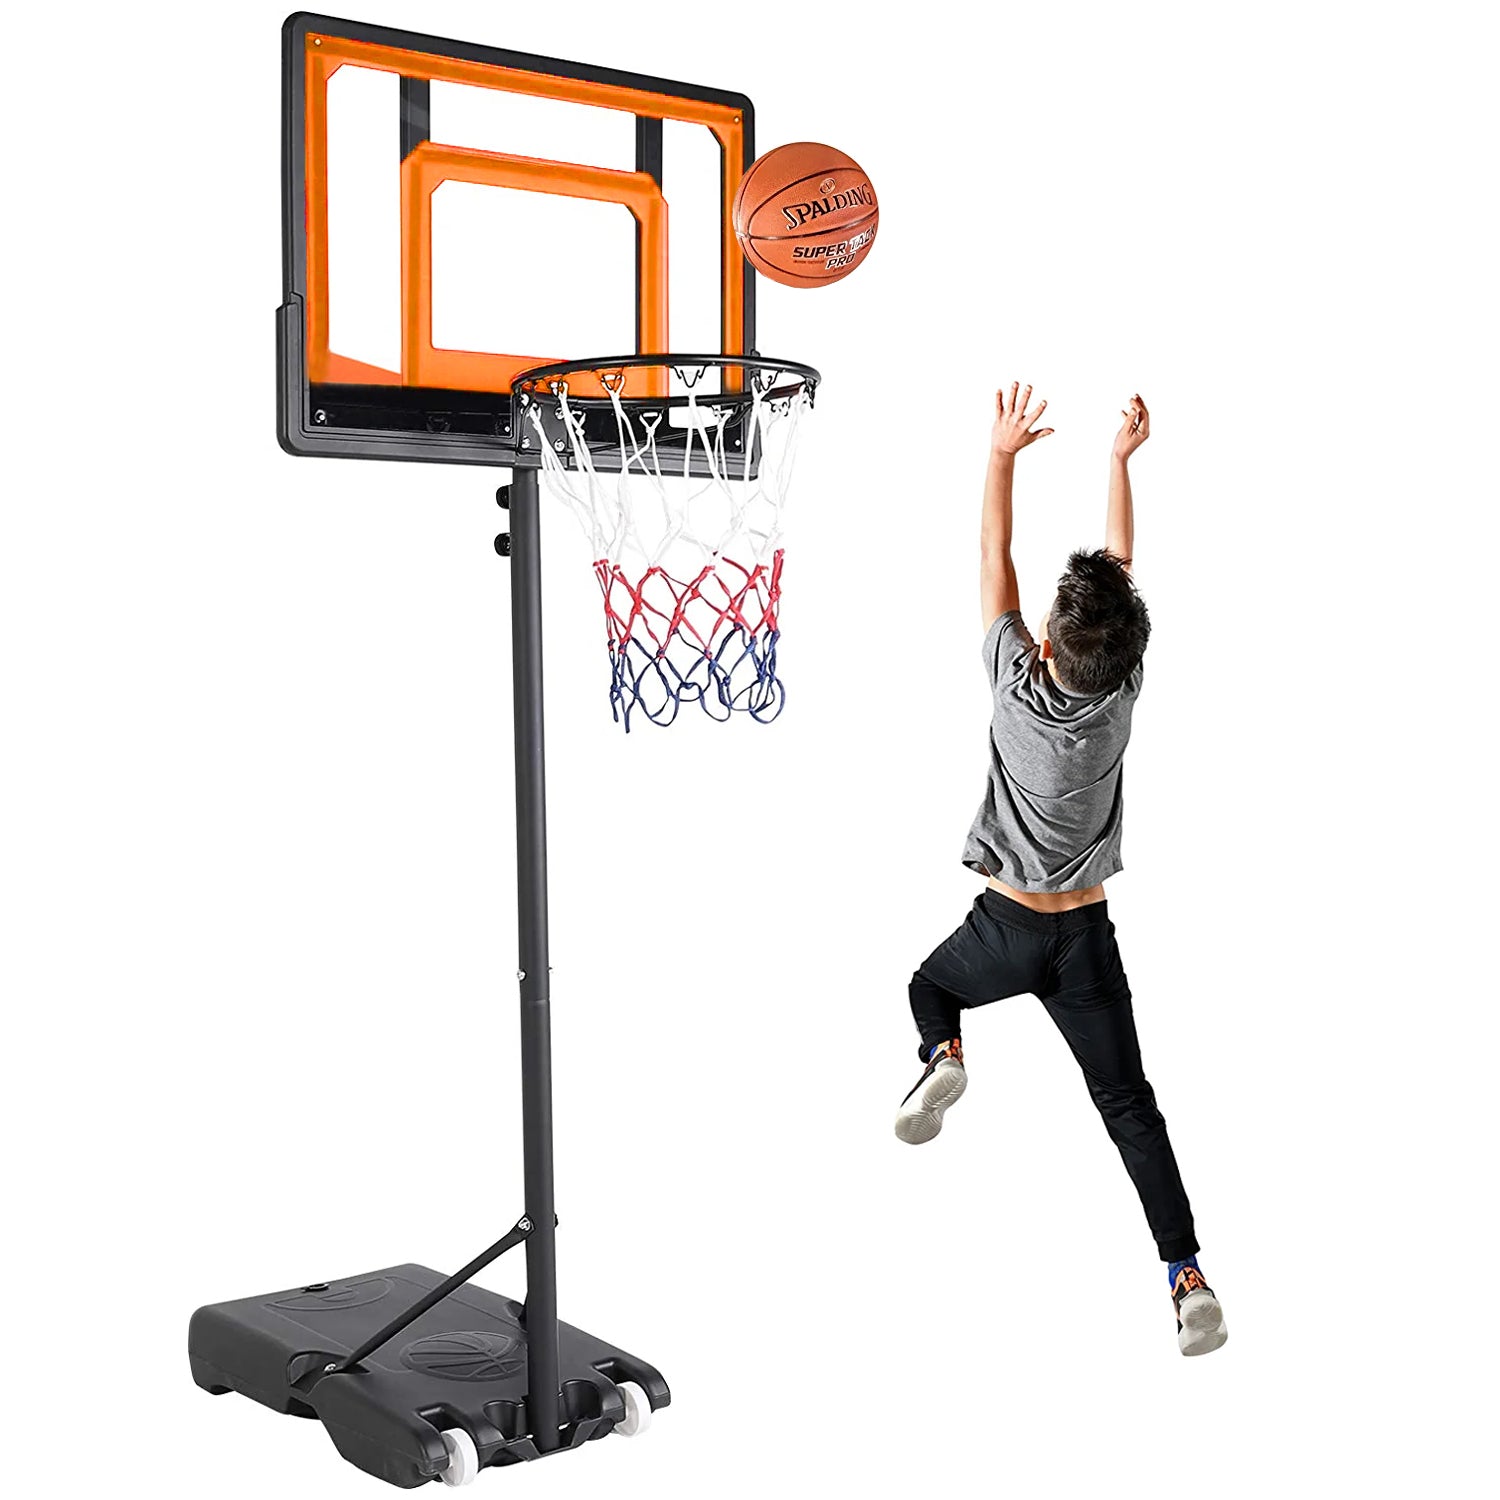 ifanze Basketball Hoop with 5 - 7 FT Adjustable Height for Kids Teenagers Youth and Adults, Portable Basketball Hoop with Stand & Backboard Wheels for Basketball Goals Indoor Outdoor Play